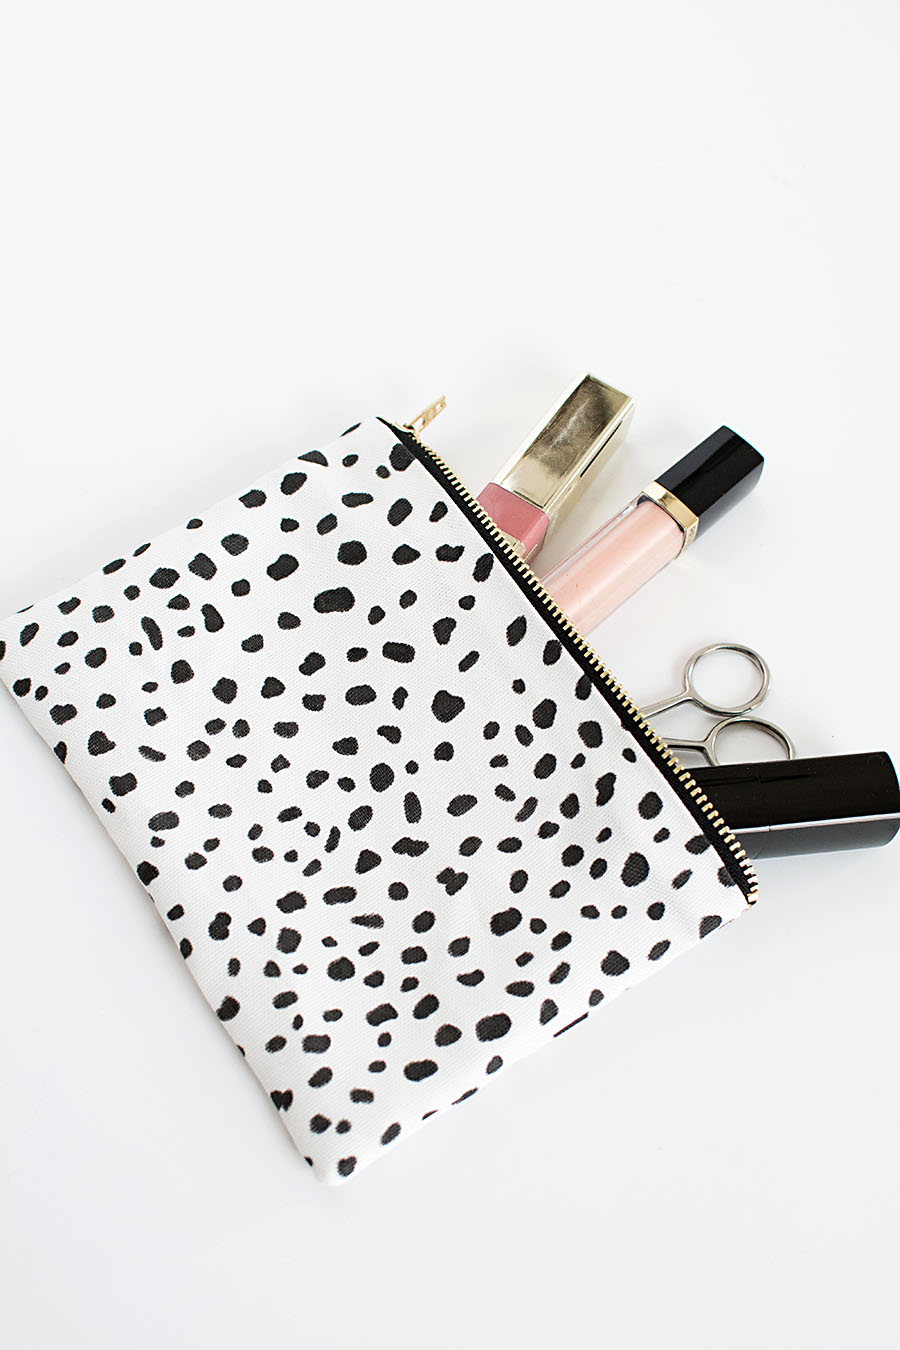 Leather and Cotton Clutch - How Did You Make This? | Luxe DIY